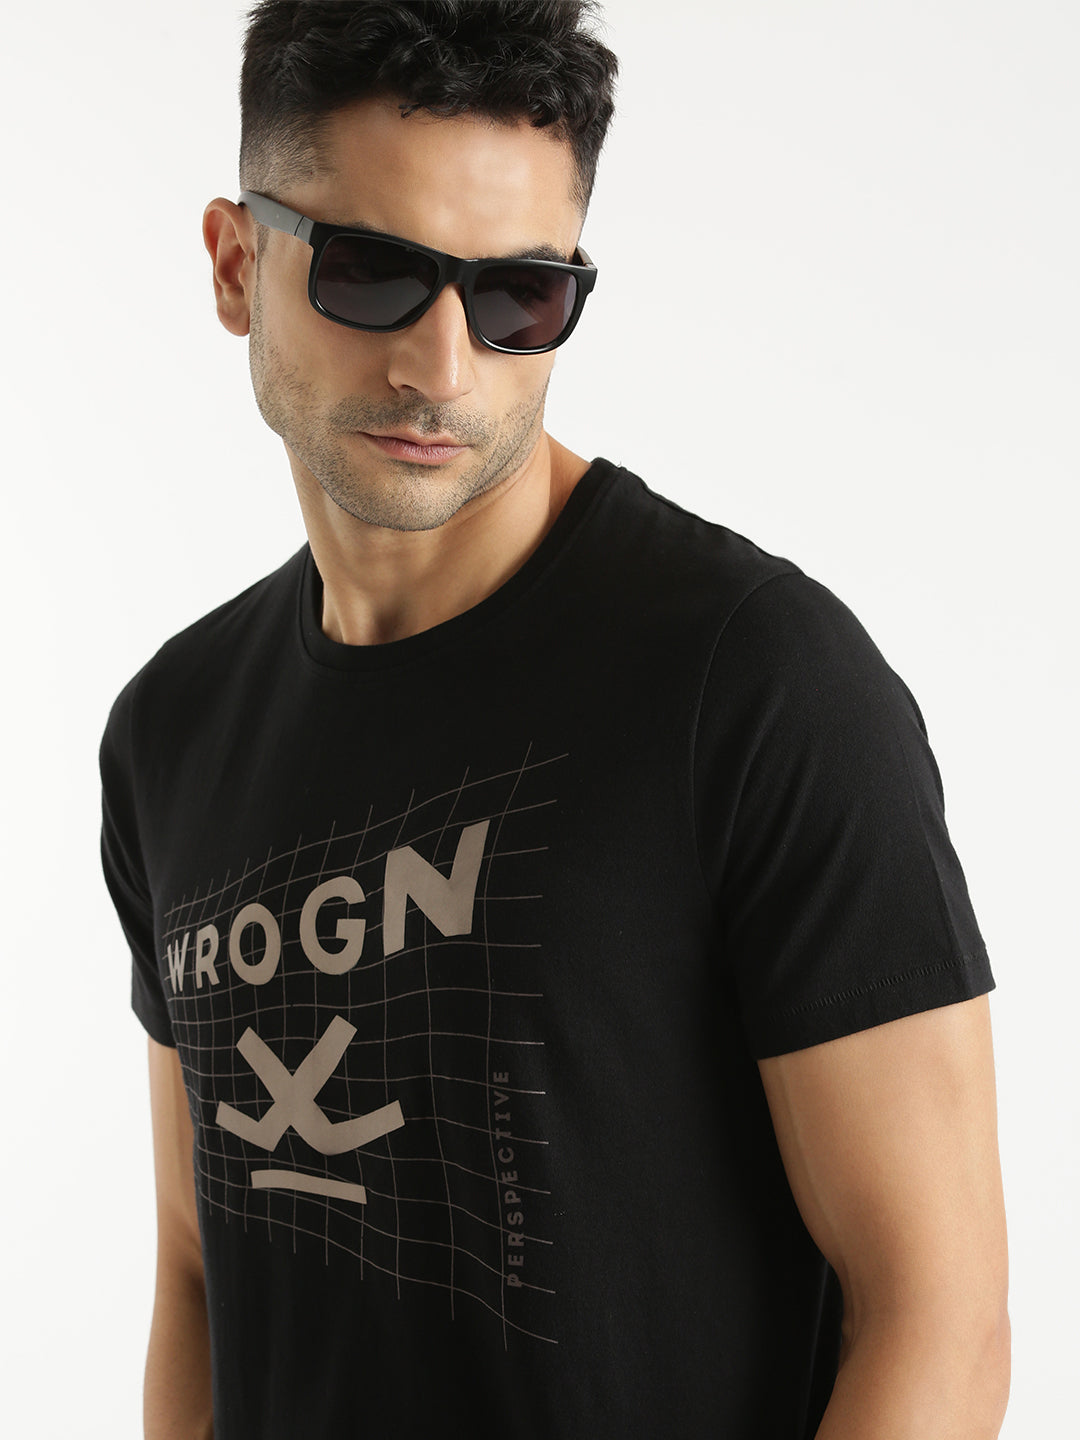 Wrogn Perspective Printed T-shirt